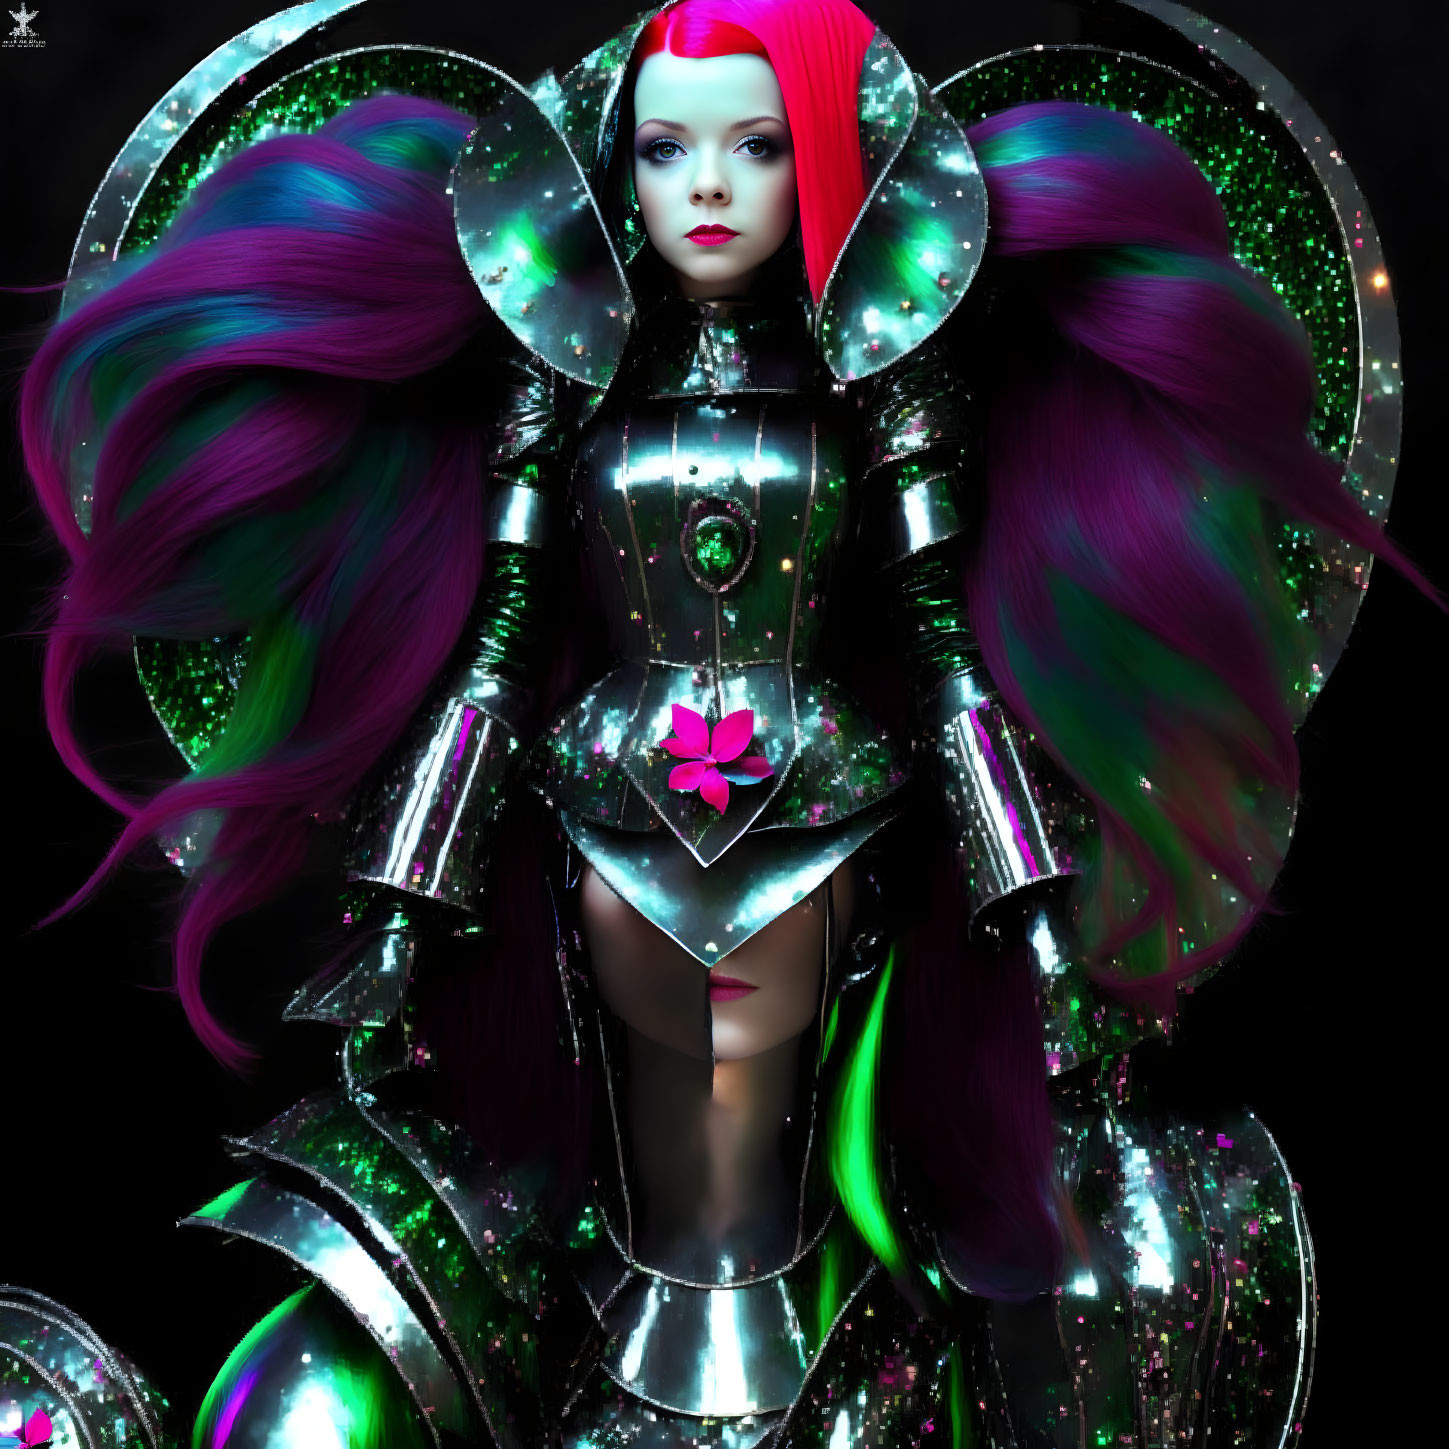 Digital artwork: Woman with pink & purple hair in futuristic armor with pink flower